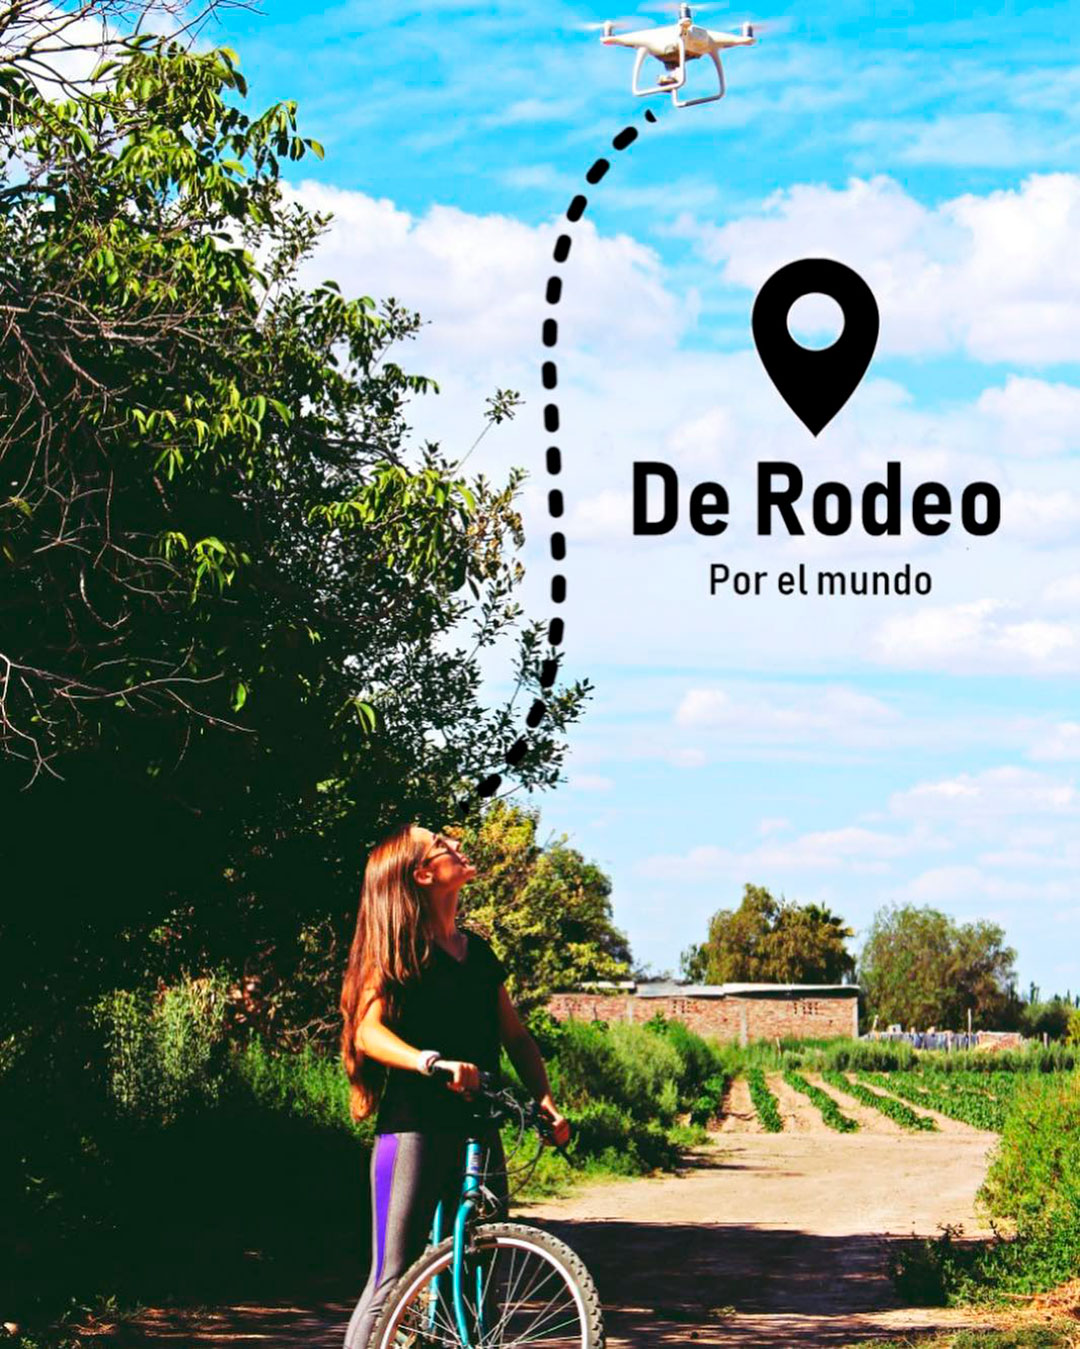 His city is located in a small town called Rodeo del Medio 